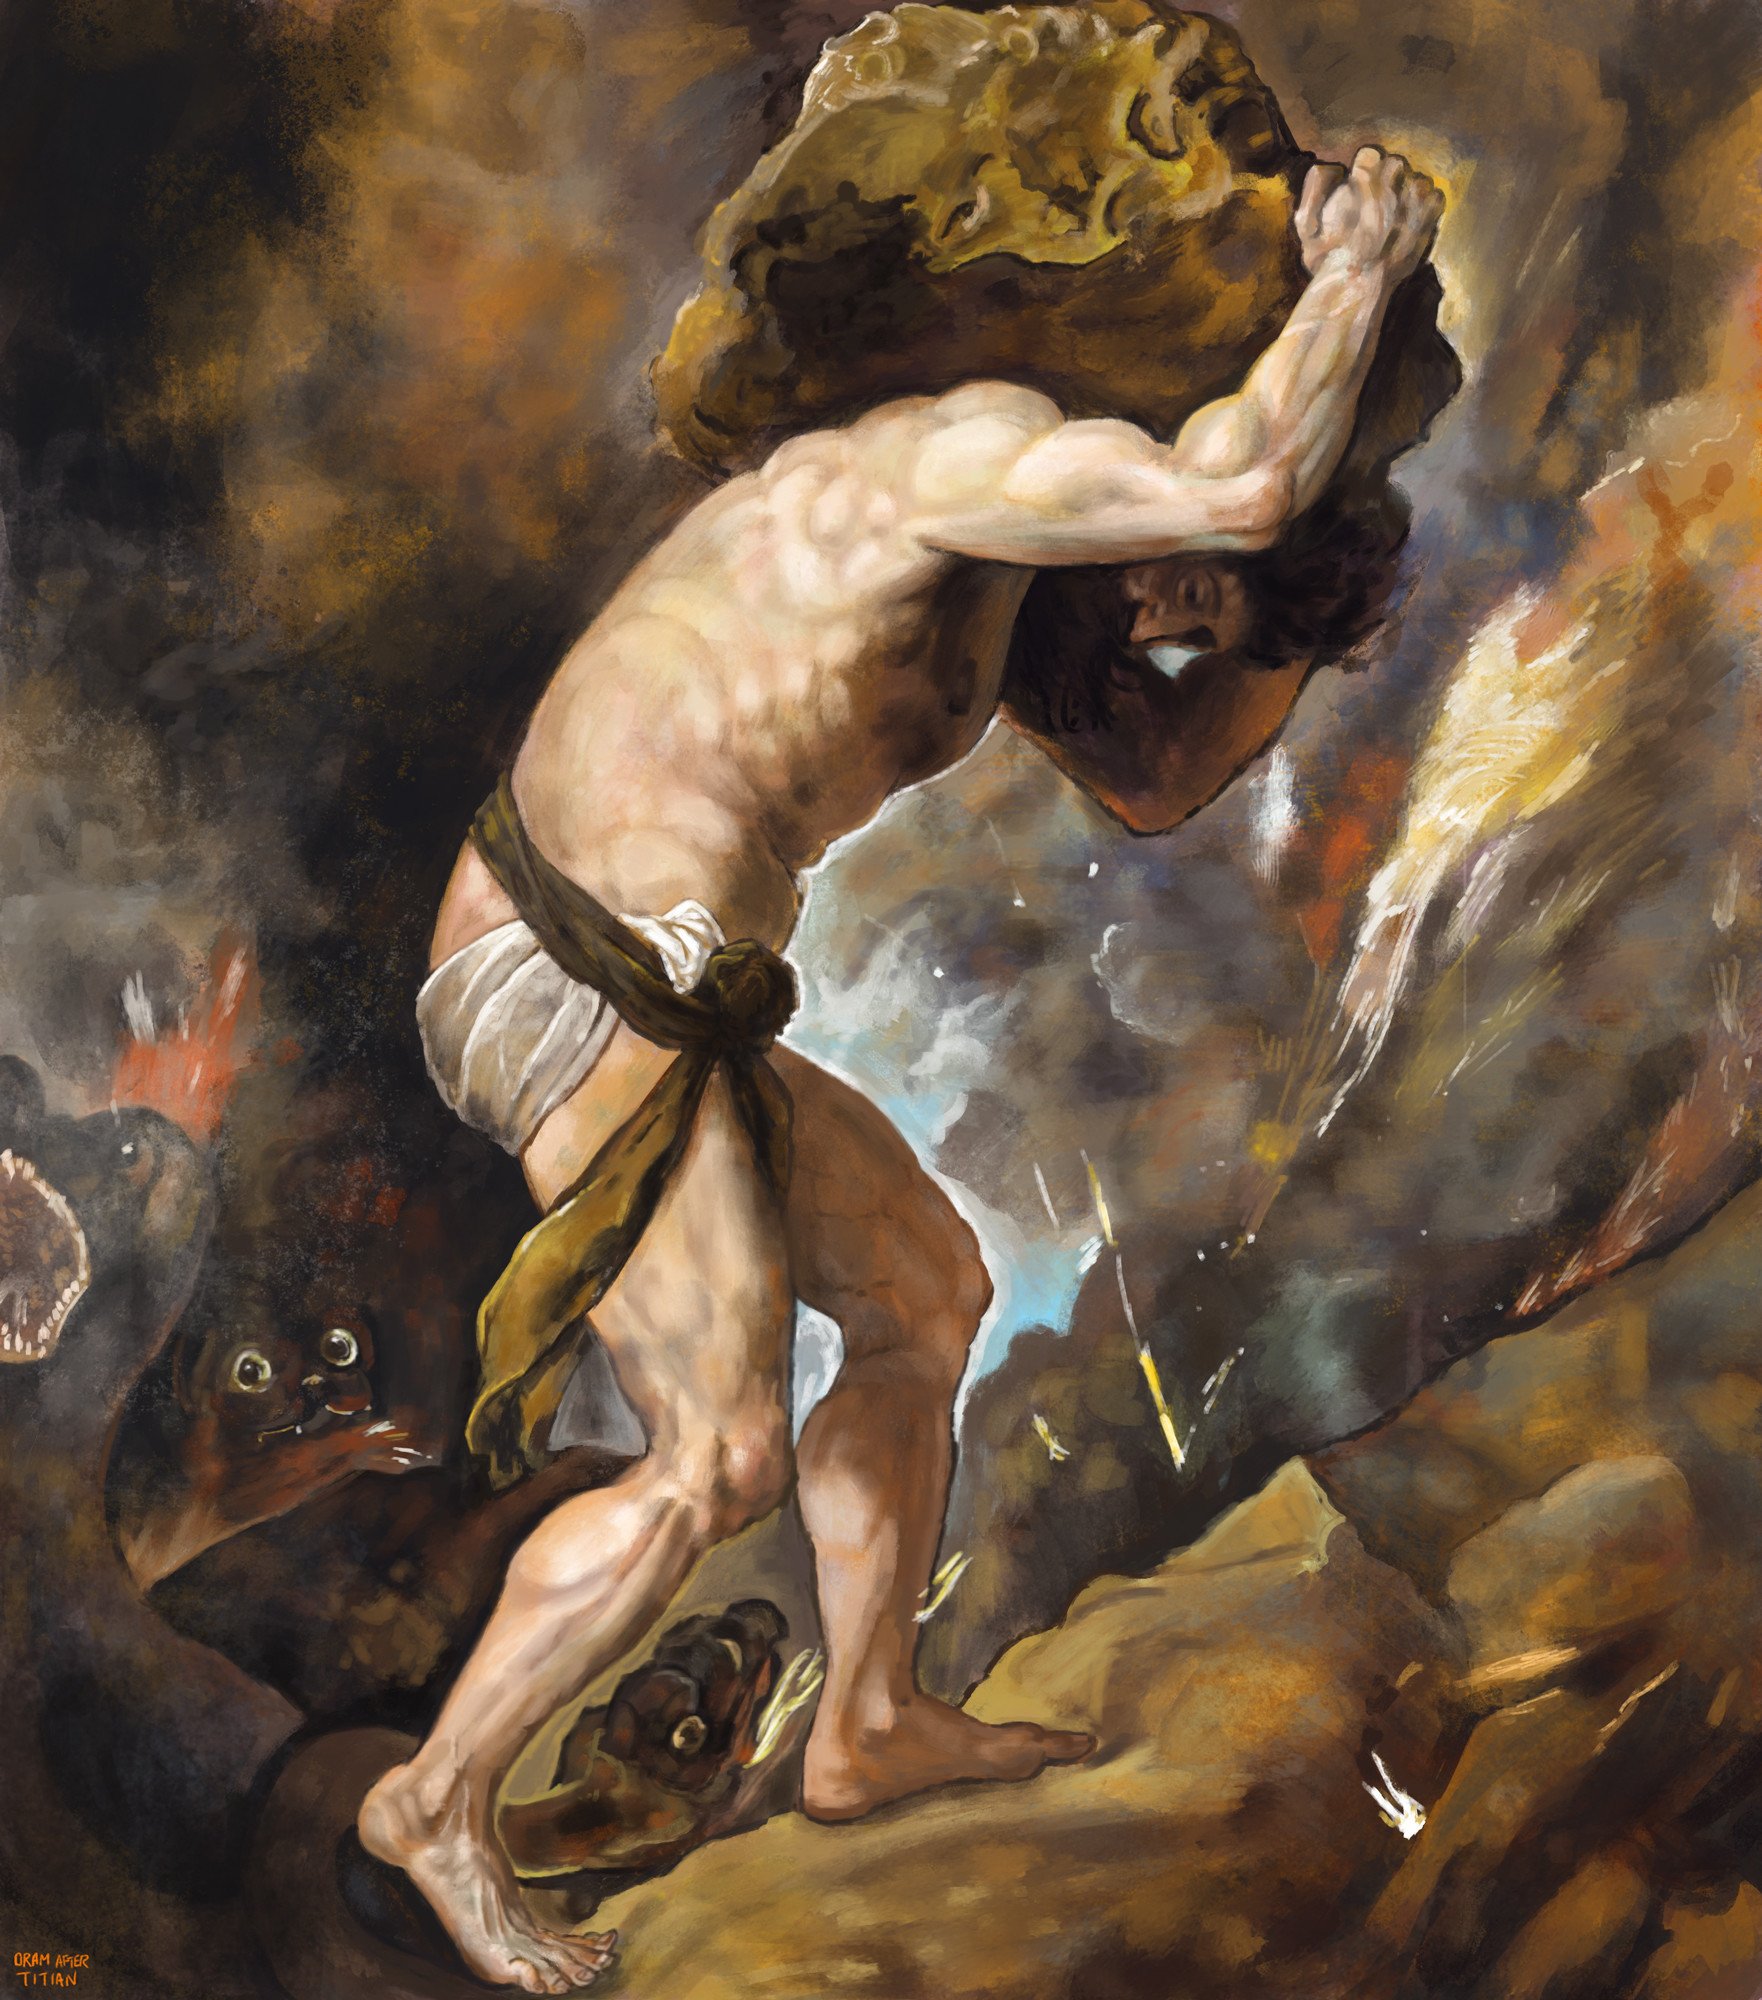 A painting of a muscular man in a loincloth pushing a large round rock up a steep hill. The man’s face shows strain and determination. The sky behind the man is dark and stormy.